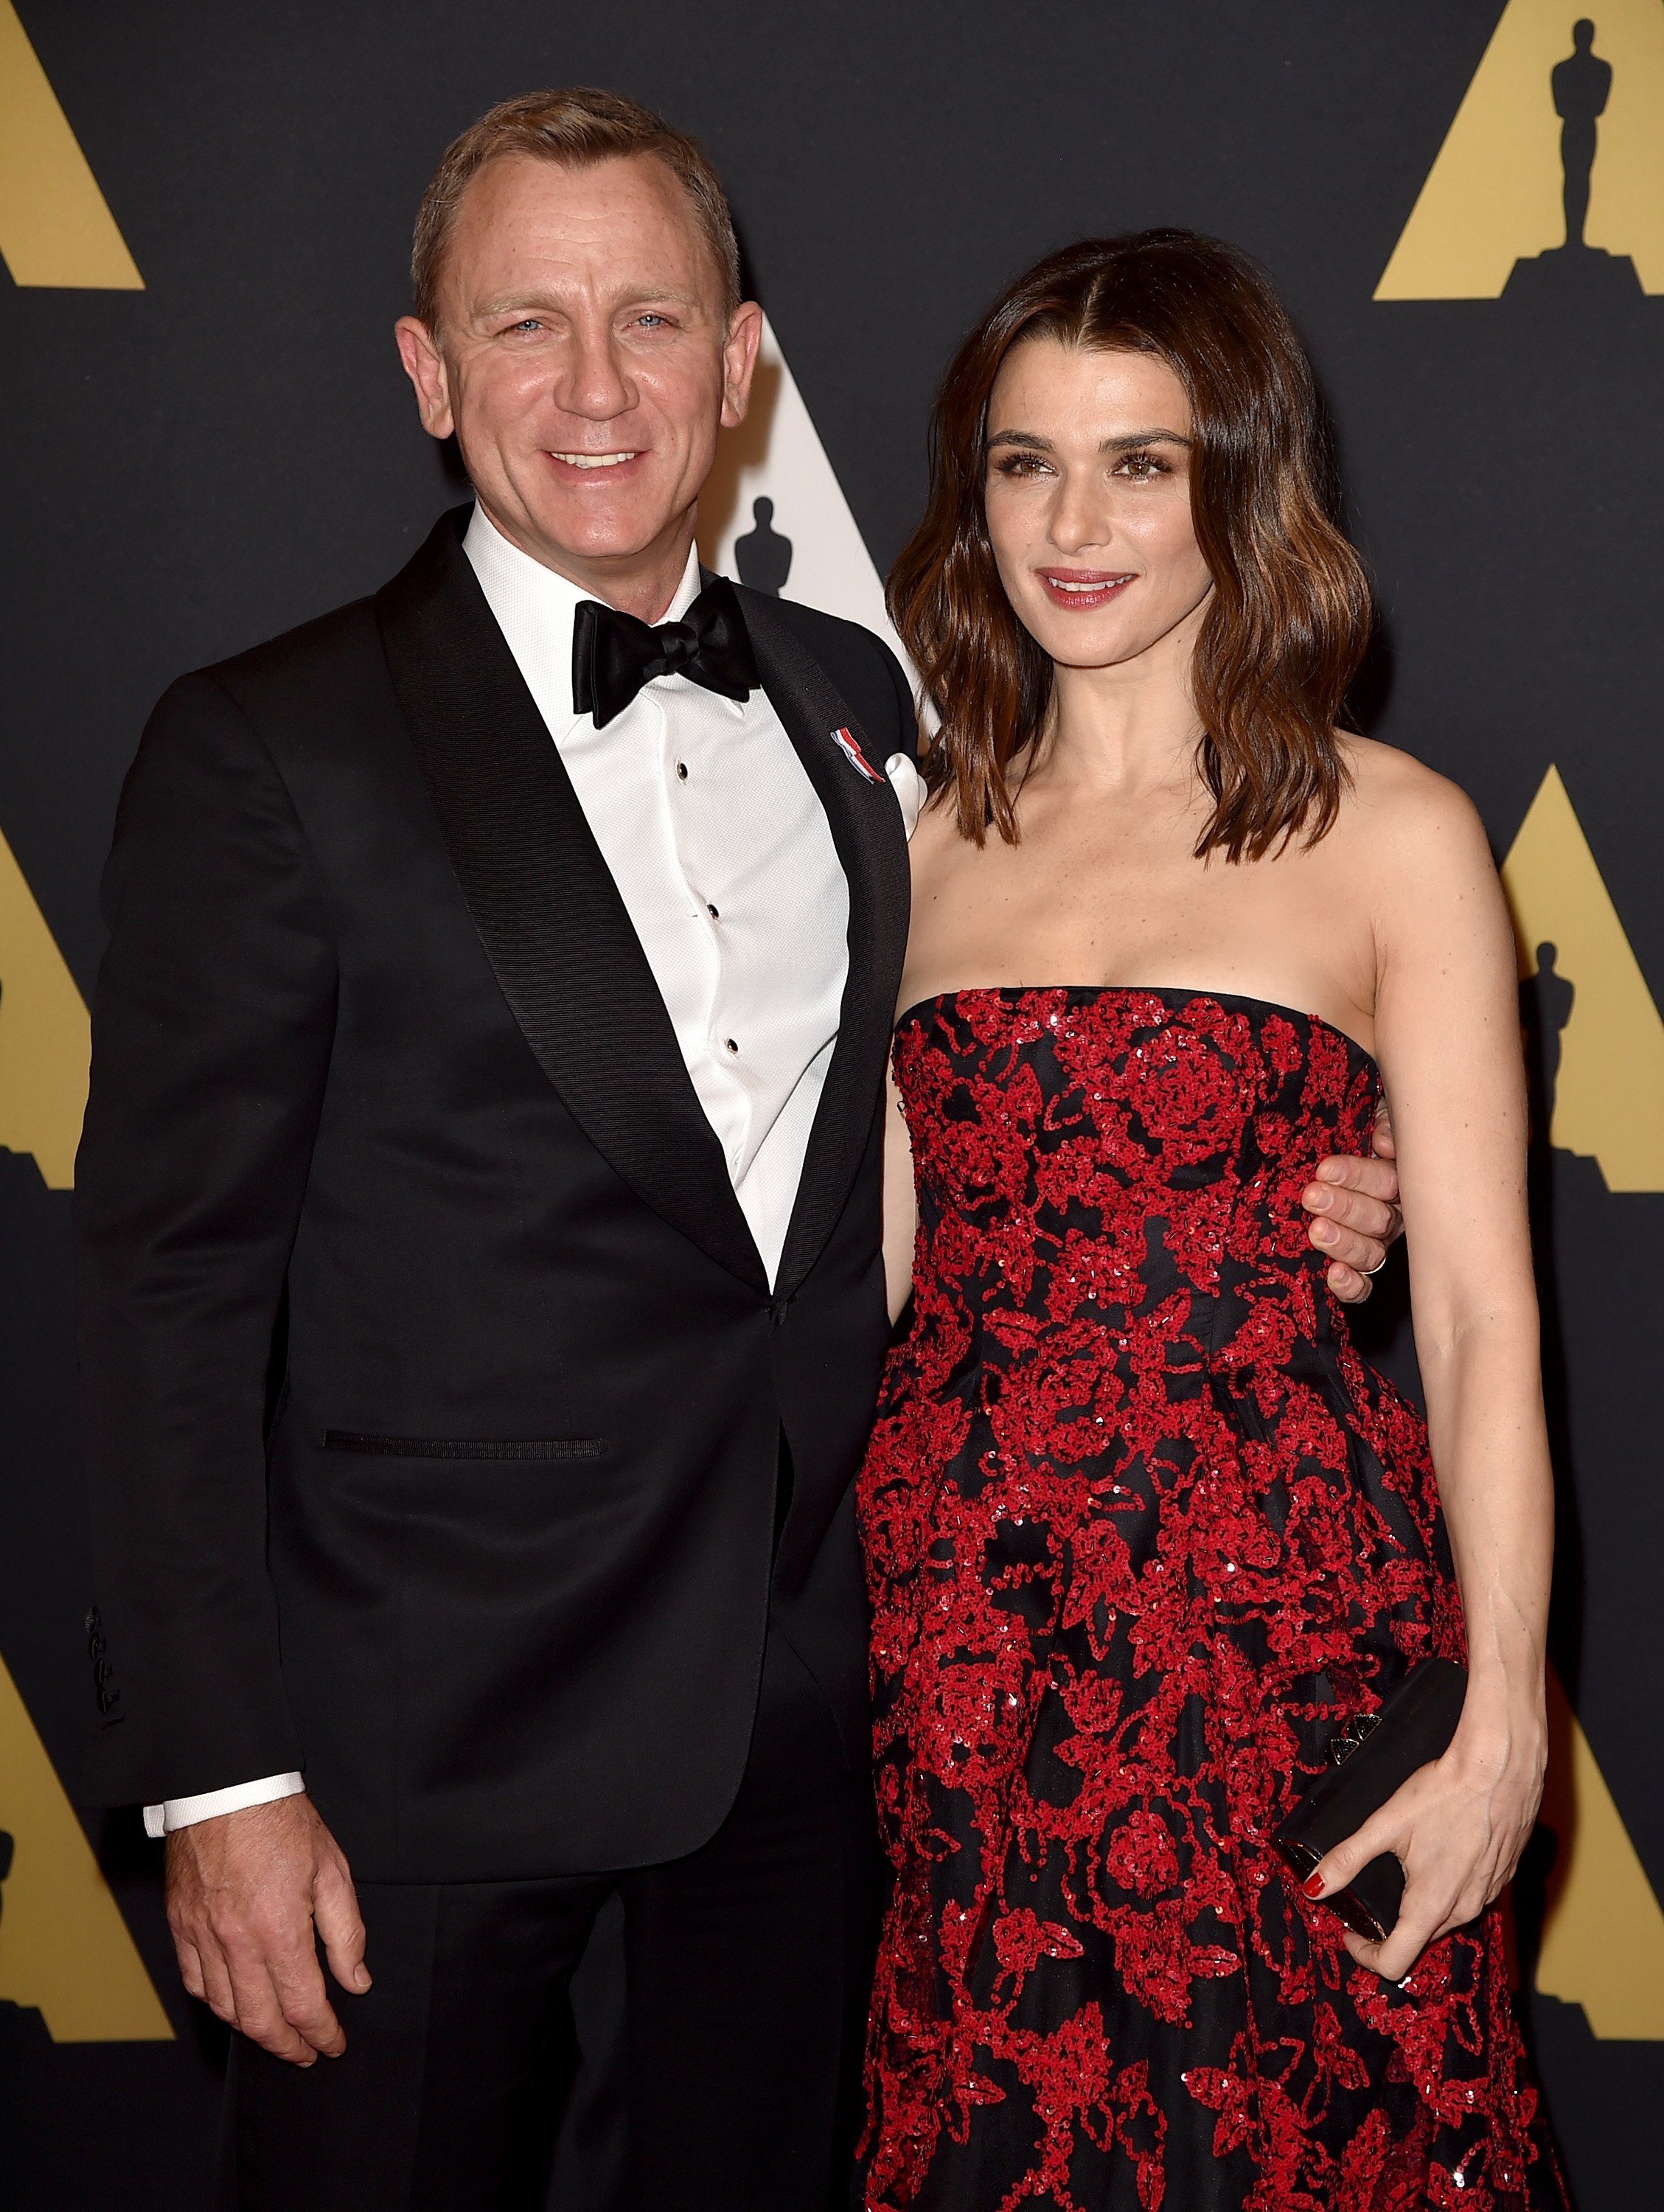 Daniel Craig and Rachel Weisz attend the Academy of Motion Picture Arts and Sciences' 7th annual Governors Awards at Hollywood & Highland Center on November 14, 2015, in Hollywood, California. | Source: Getty Images